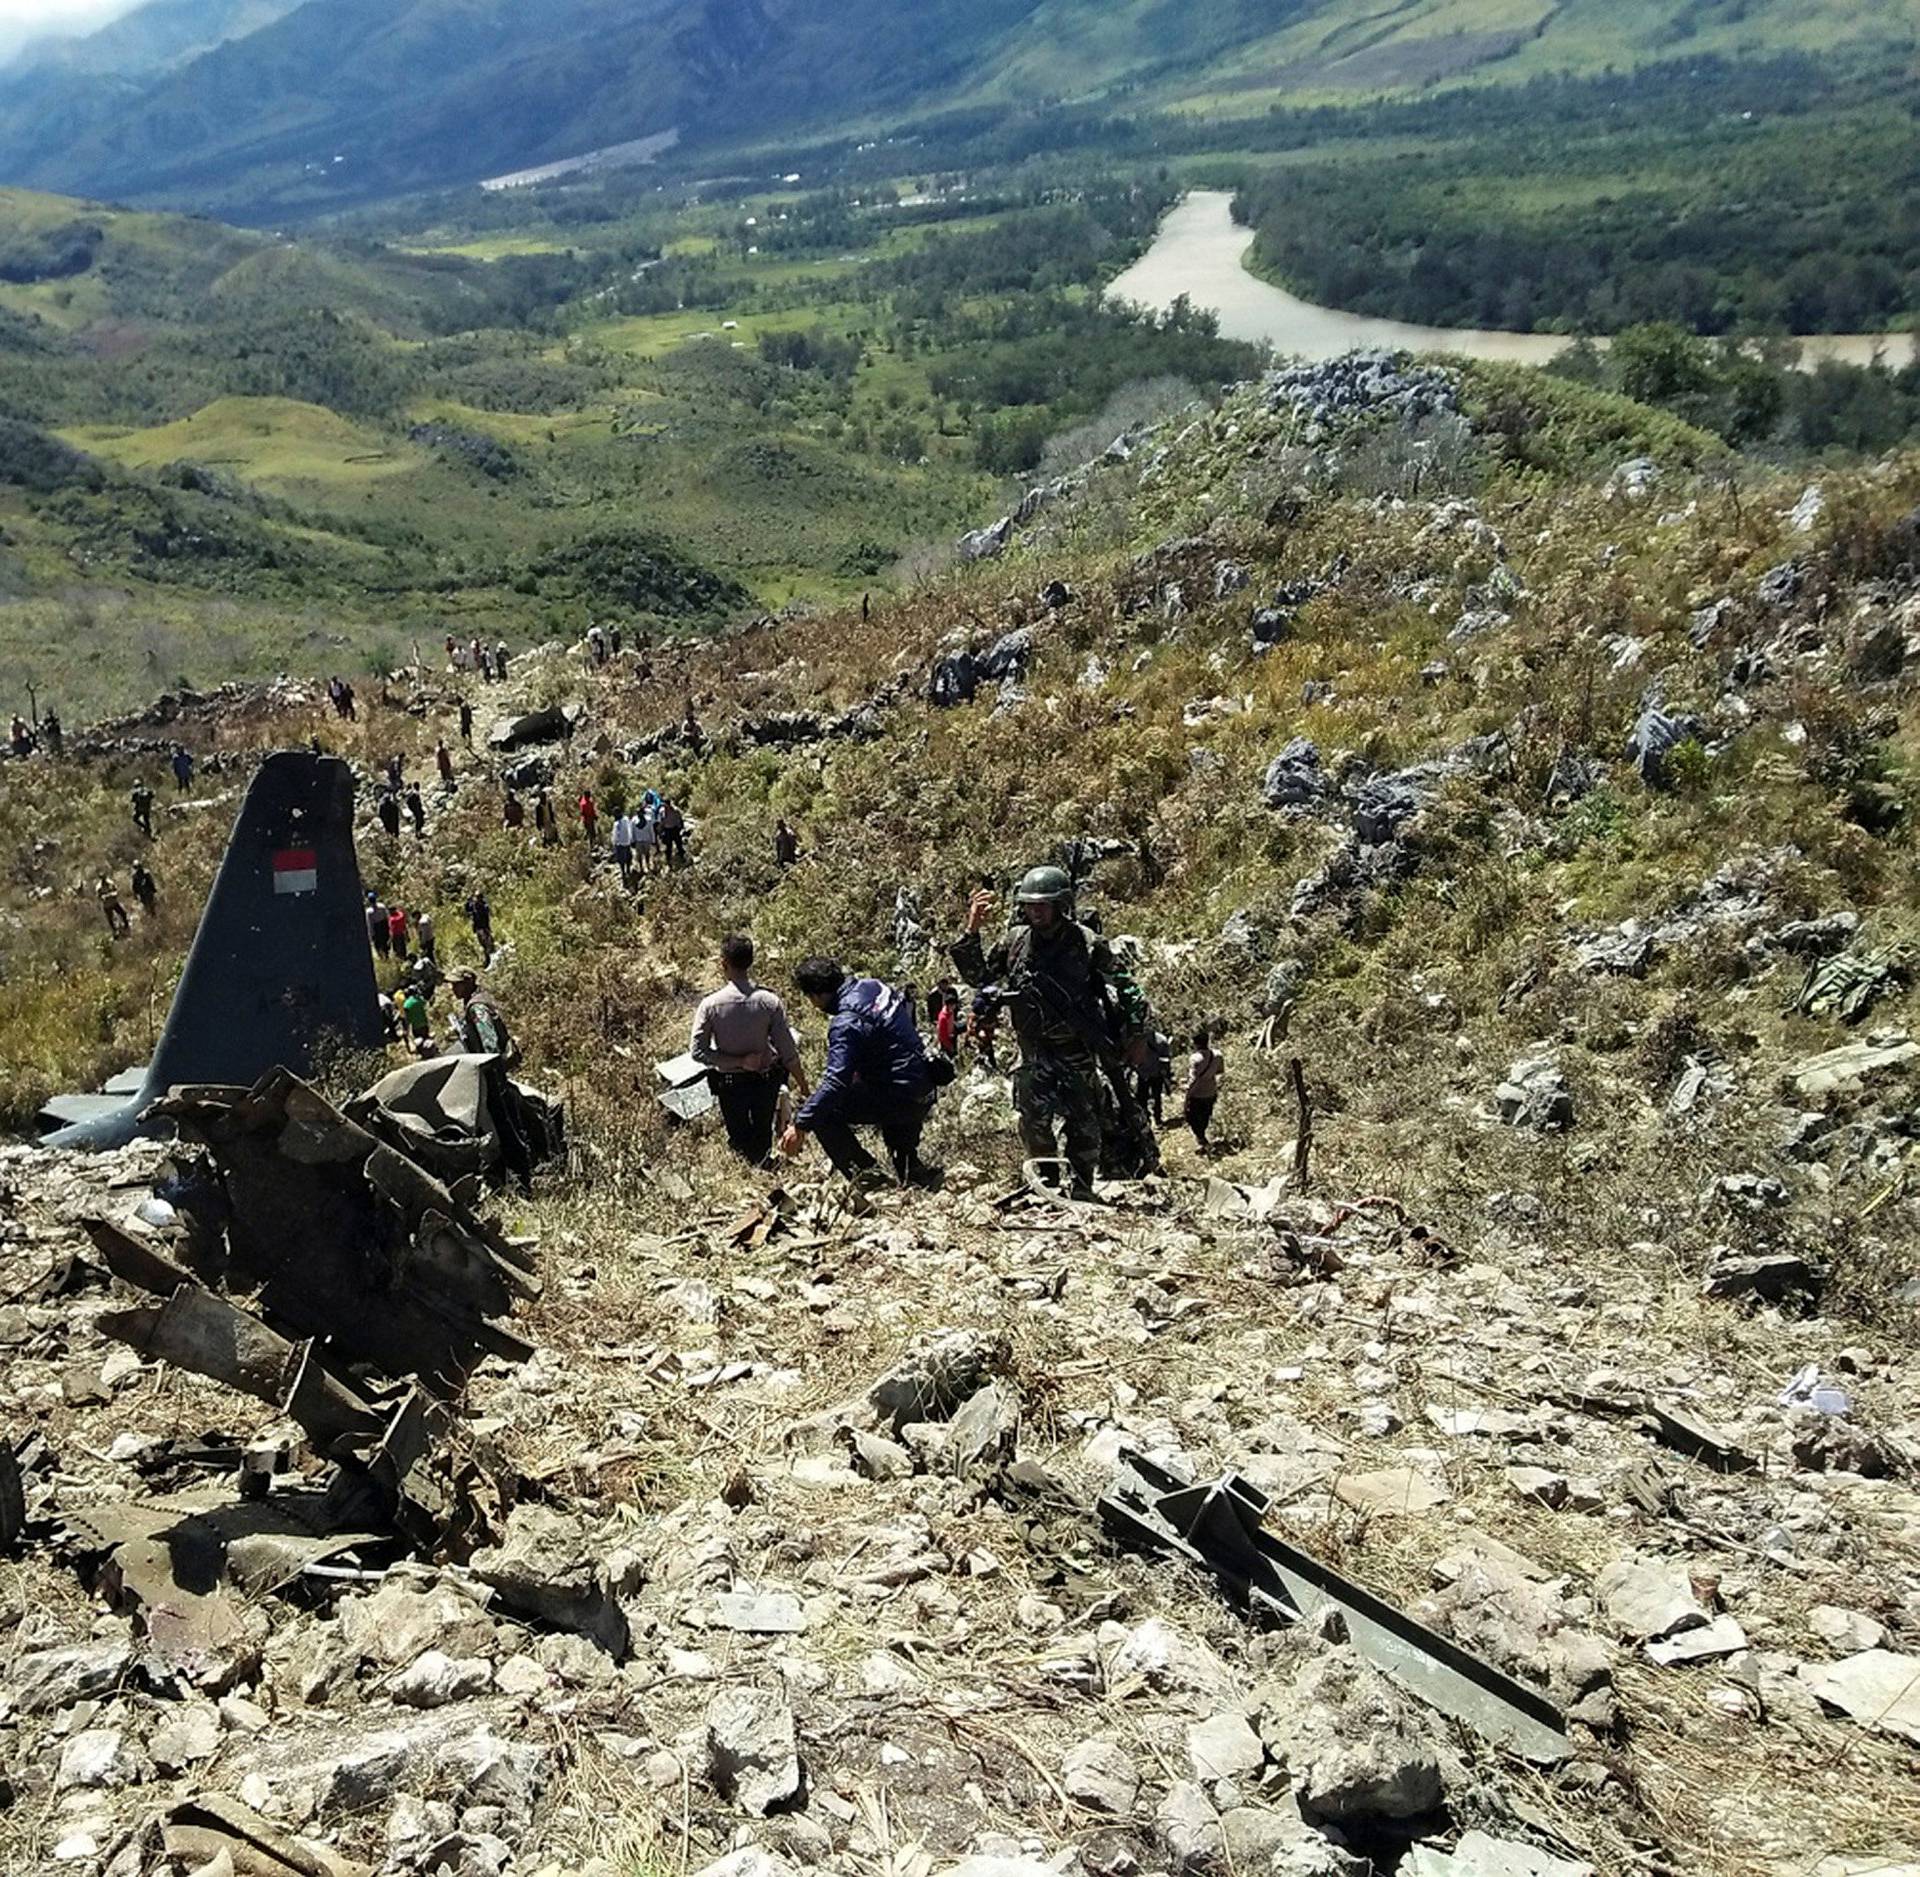 Rescue teams and locals are seen at the crash site of Indonesian air force transport plane which killed all 13 people board, on Mount Lisuwa, near Wamena in the remote region of Papua, Indonesia